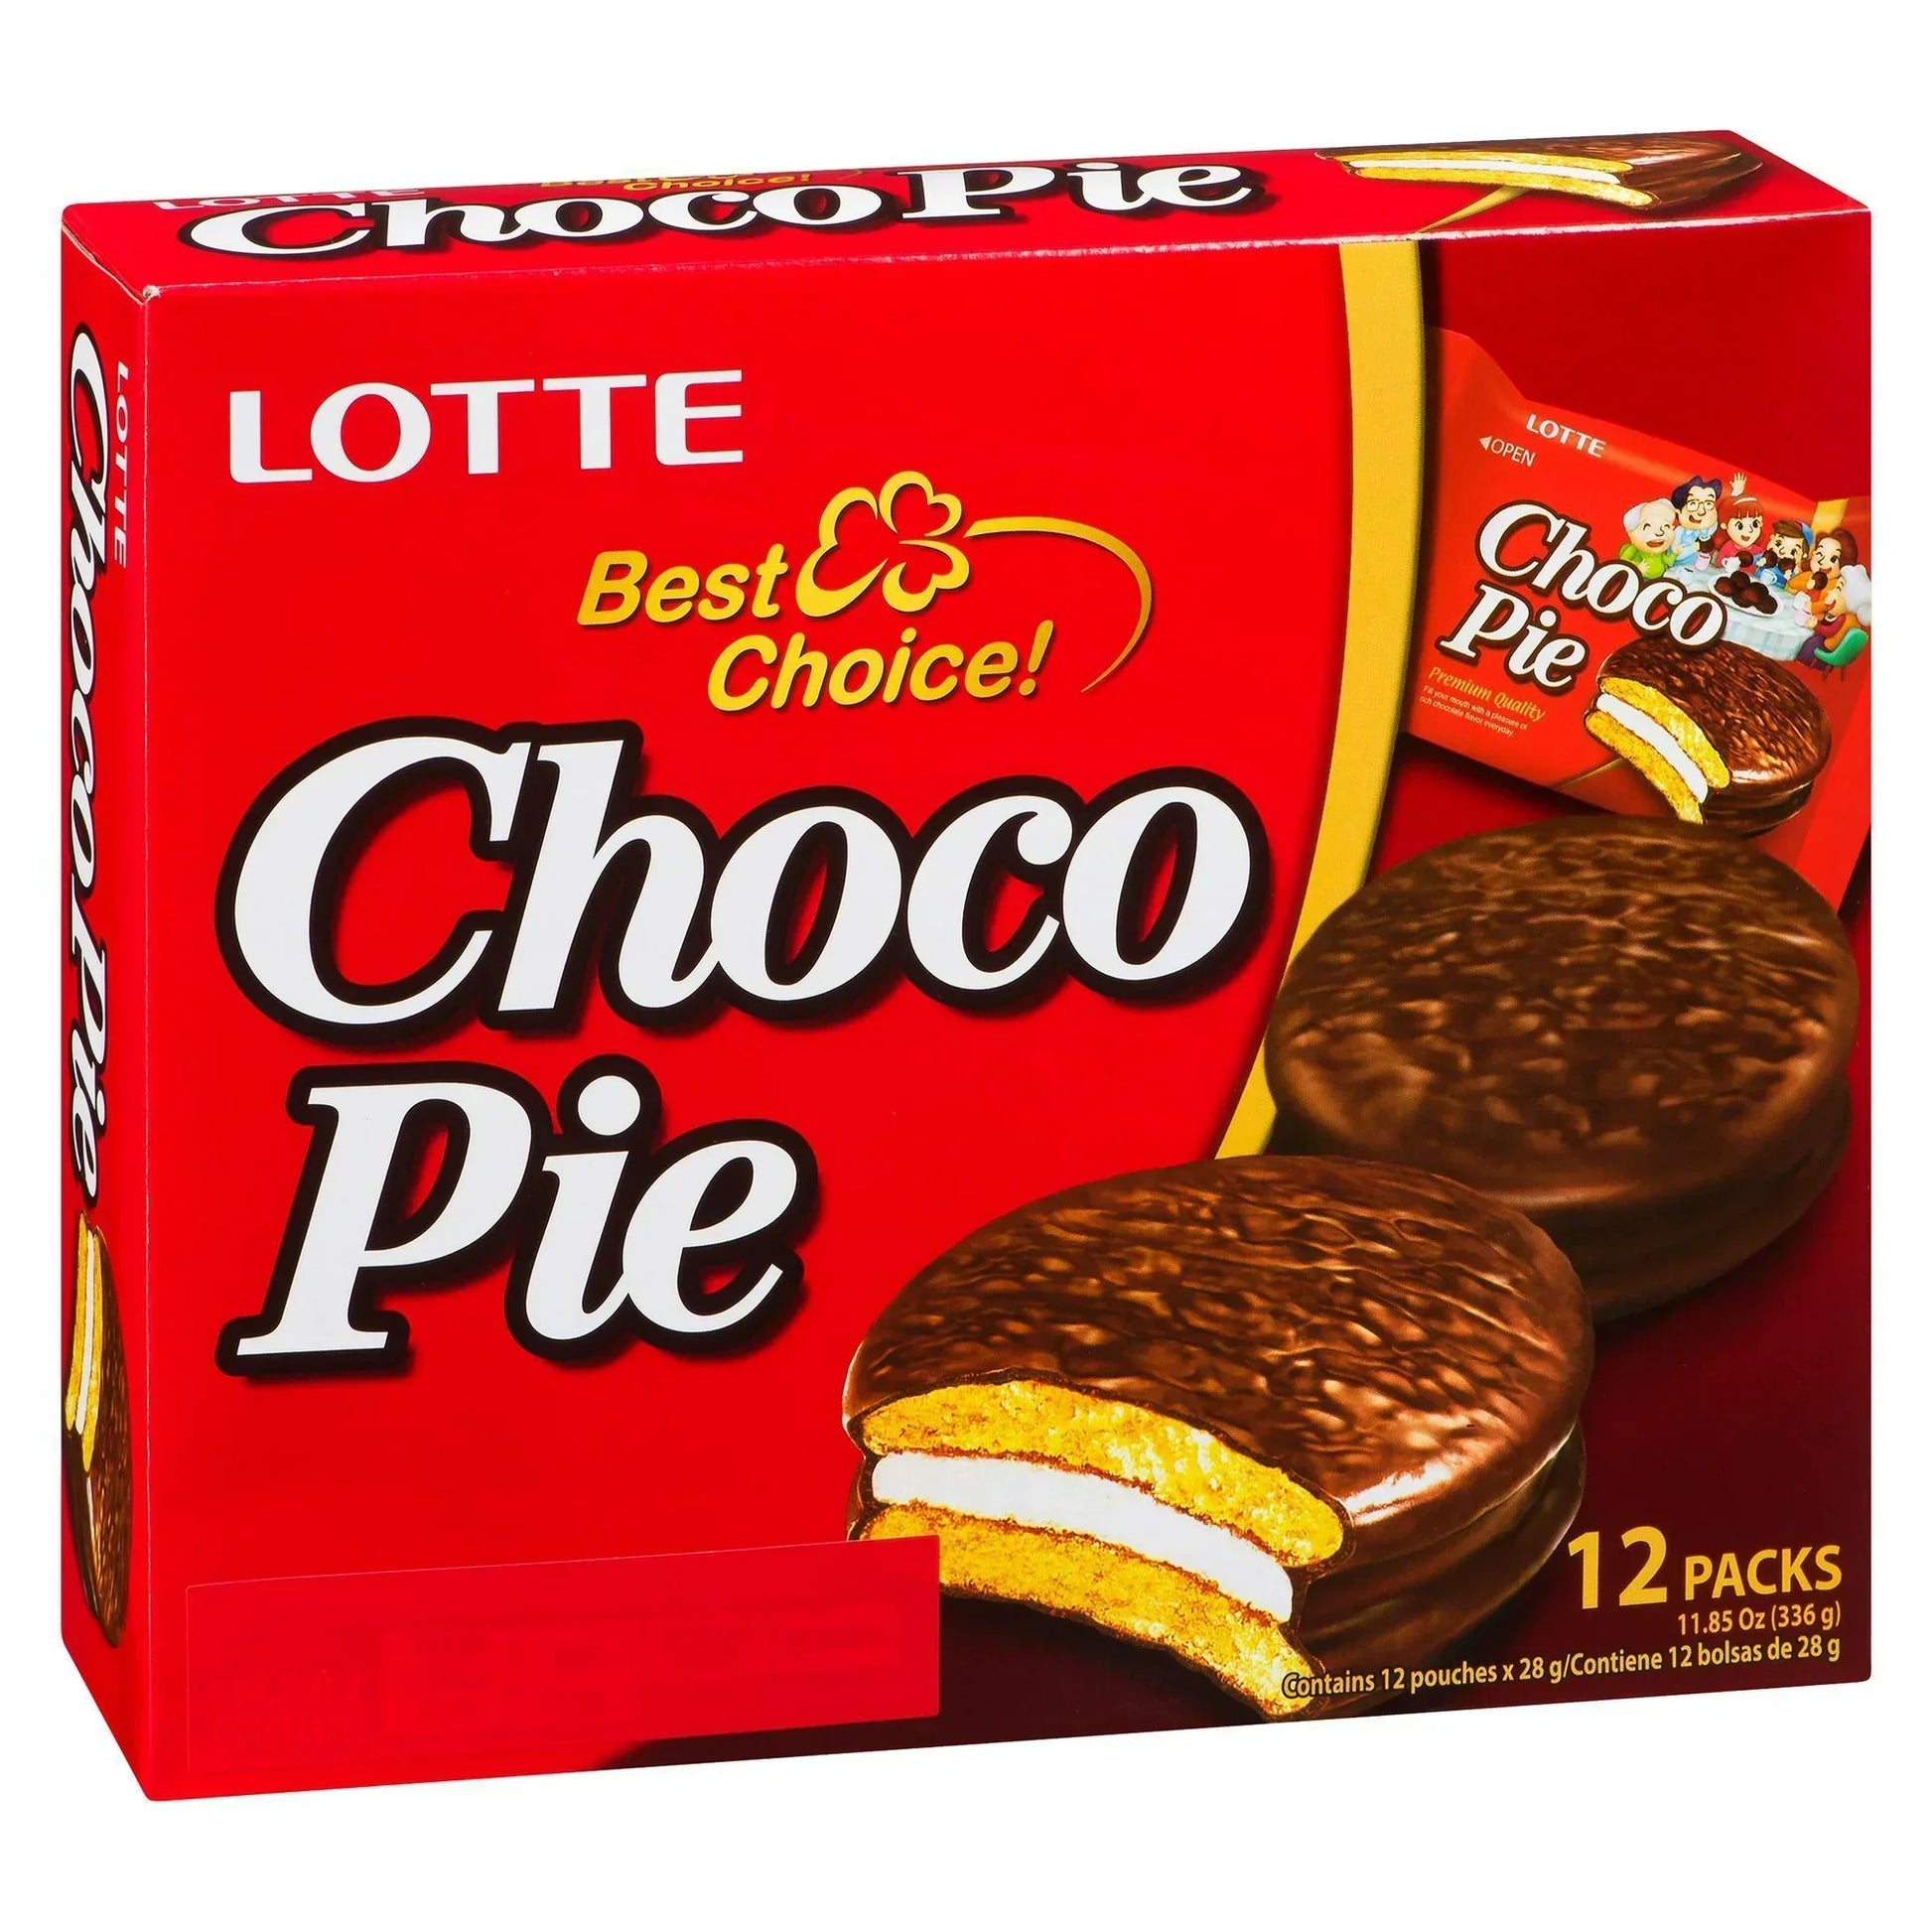 Lotte Choco Pie Chocolate Biscuit - The Snacks Box - Asian Snacks Store - The Snacks Box - Korean Snack - Japanese Snack